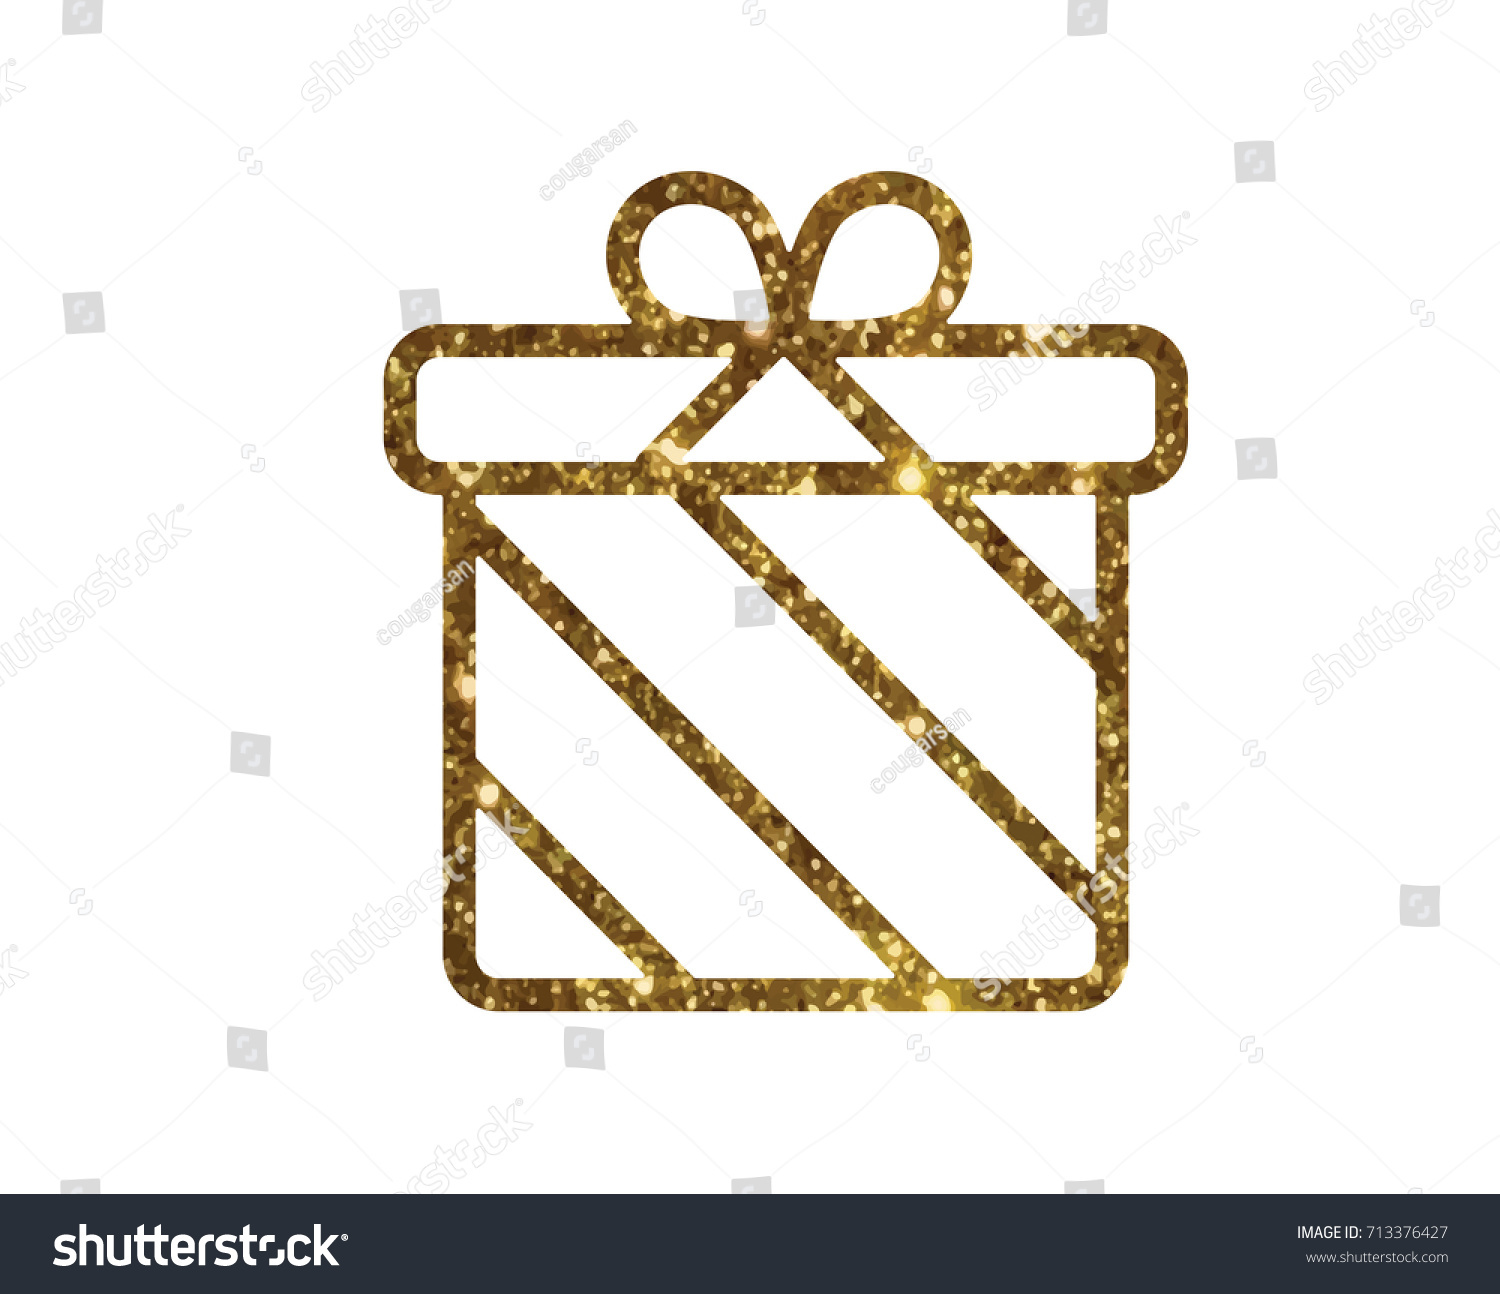 SVG of The isolated glitter golden holiday gift box icon svg